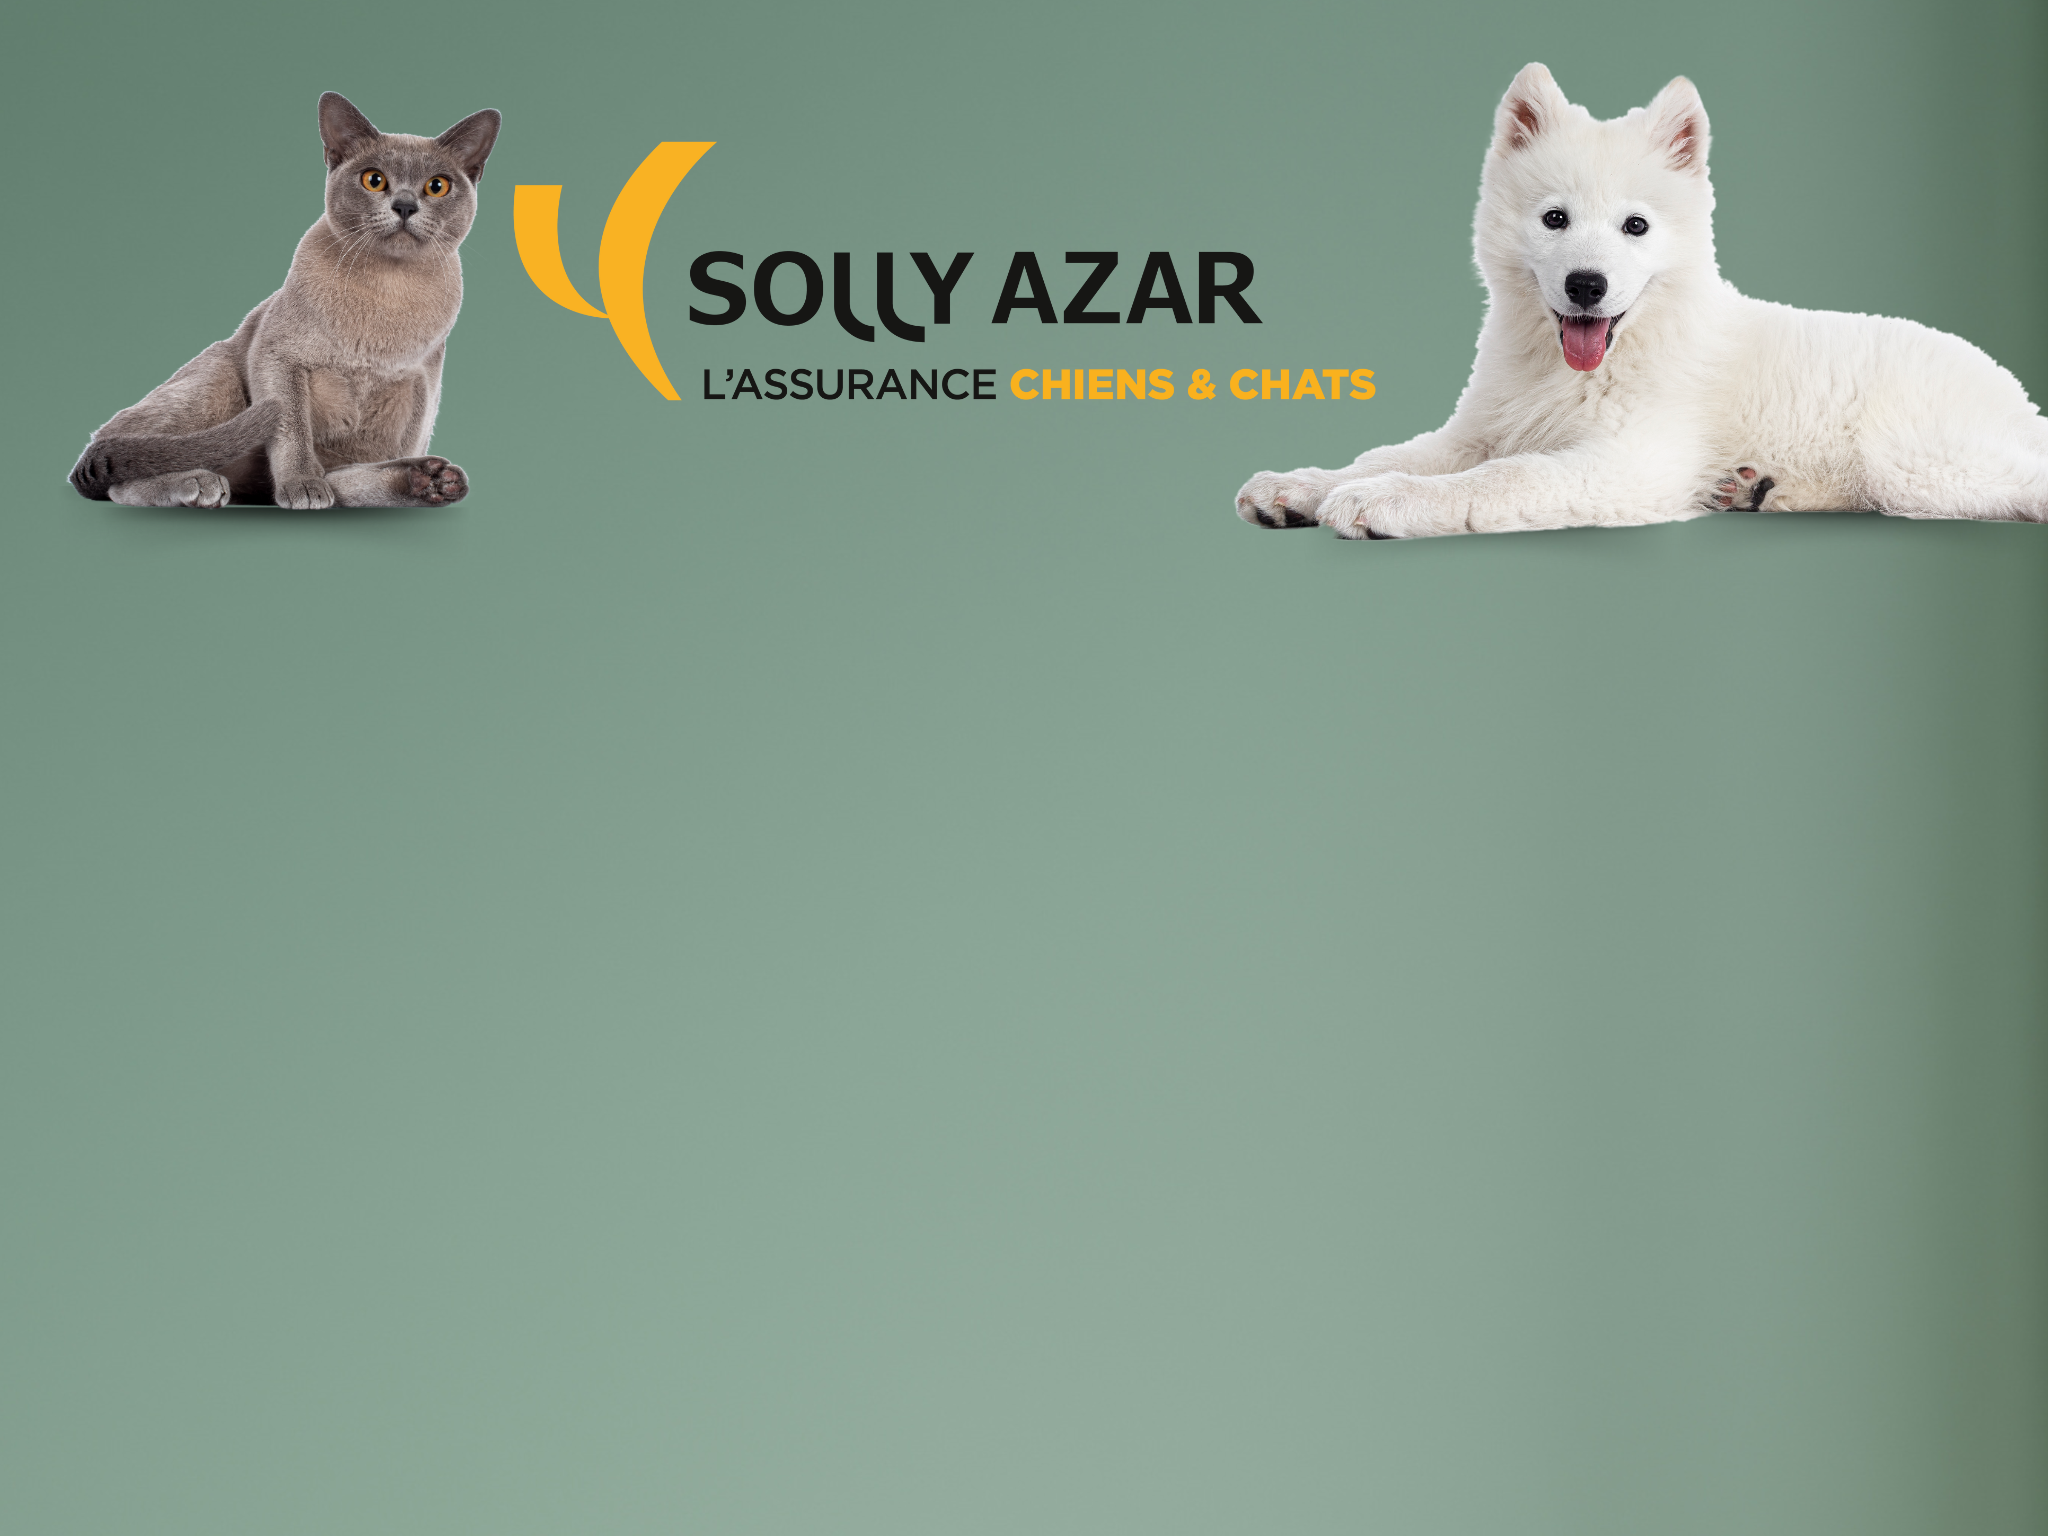 Solly Azar assurance chien chat